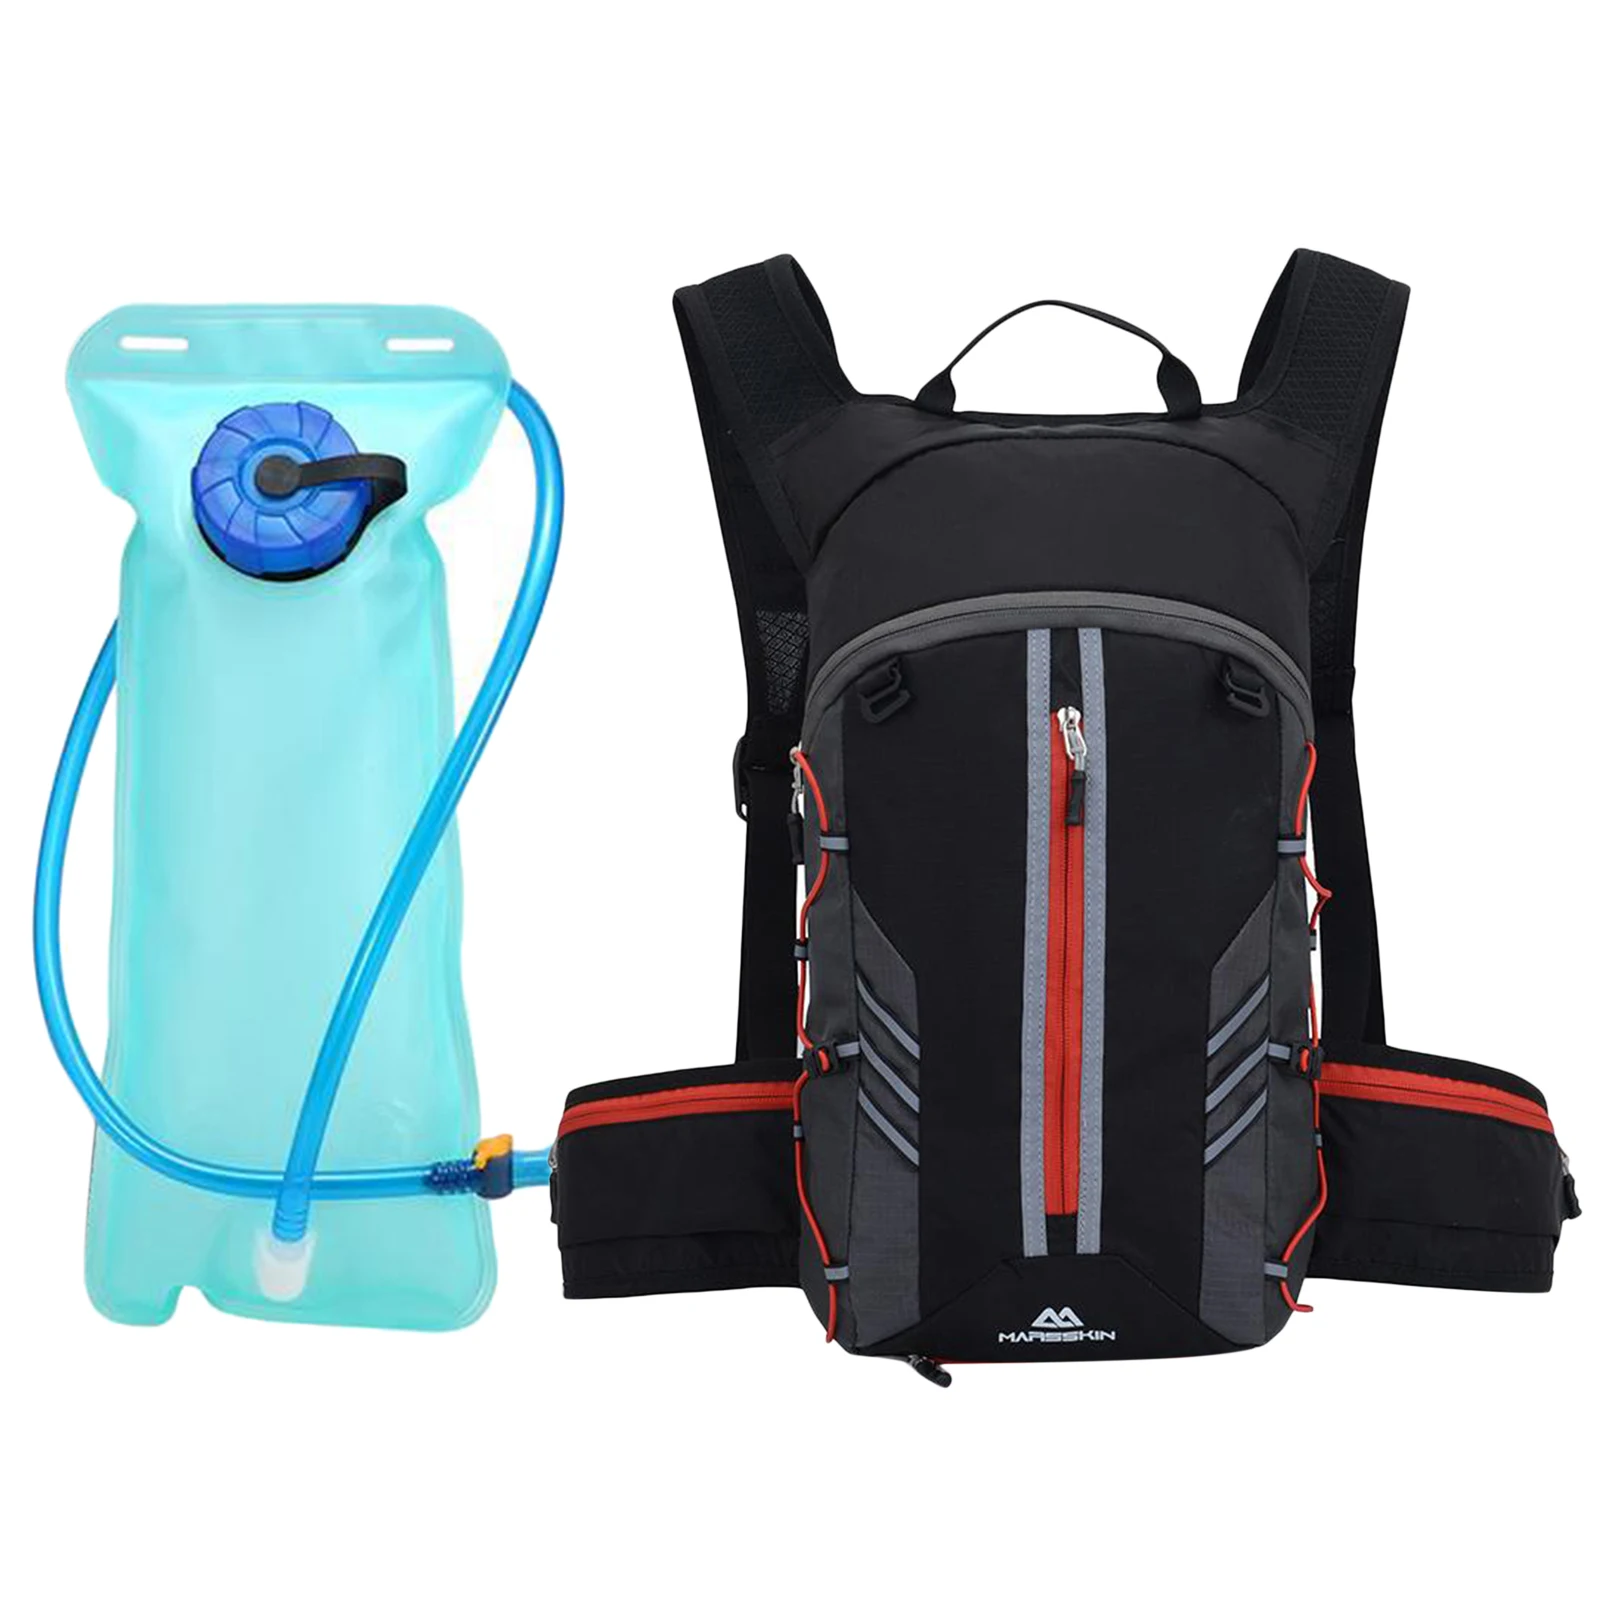 Lightweight Waterproof Durable Camping Daypack Bicycle Rucksack 10L Foldable Hydration Backpack Outdoor Folding Storage Compartment for Cycling Running Hiking Fishing